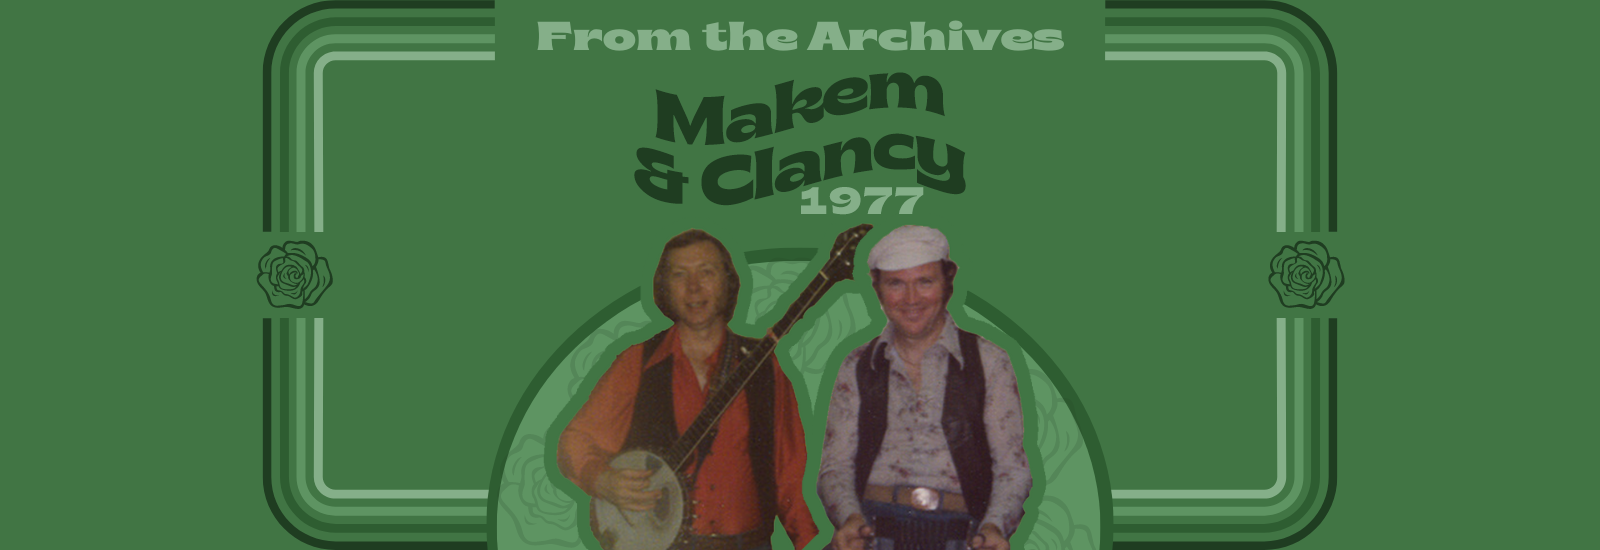 Makem and Clancy 1977 #101